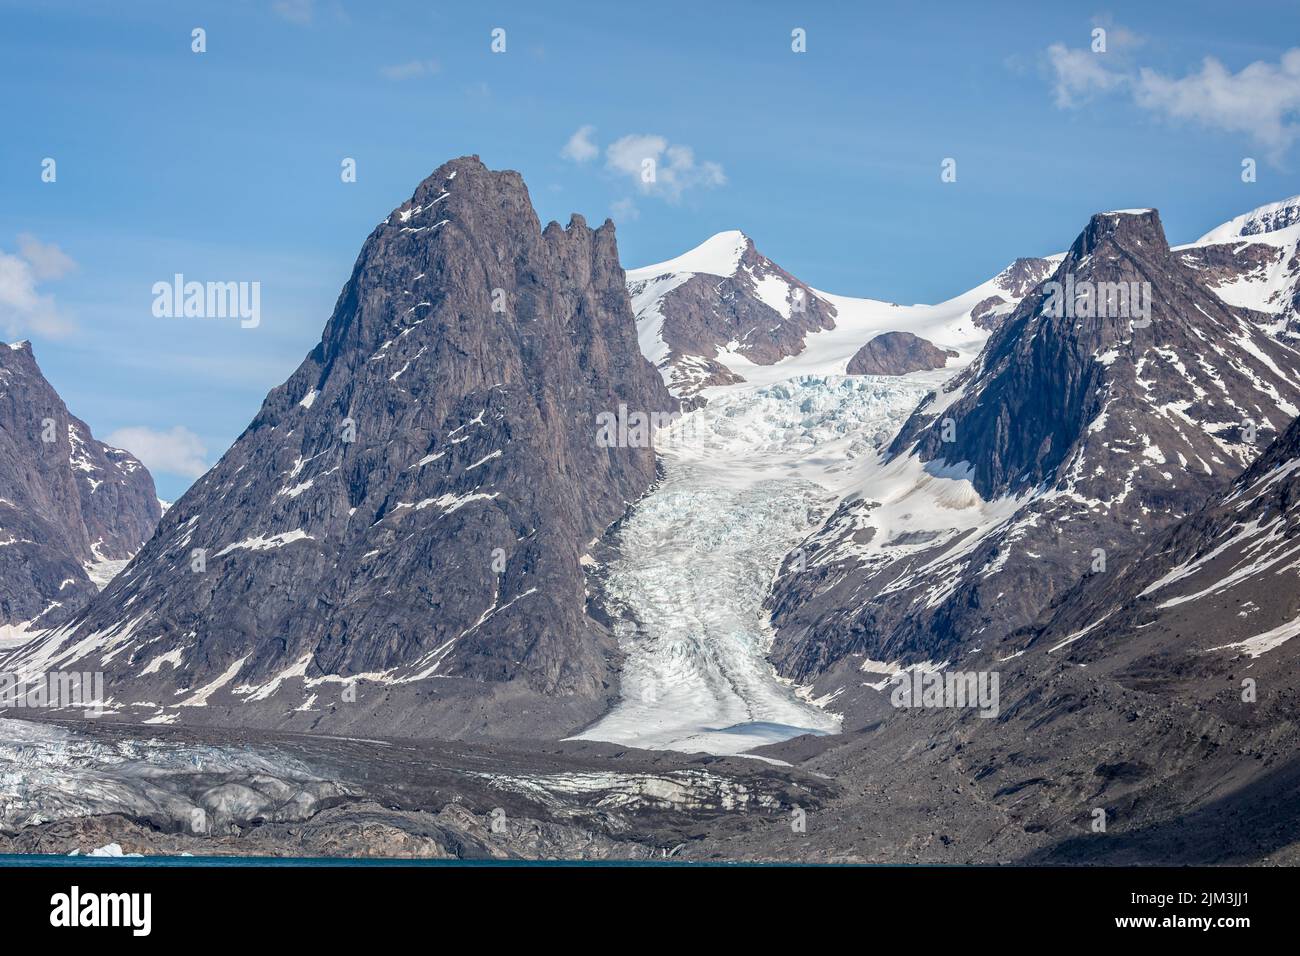 Large glacier flowing down mountain side to the sea at Evighedsfjord, Greenland Stock Photo